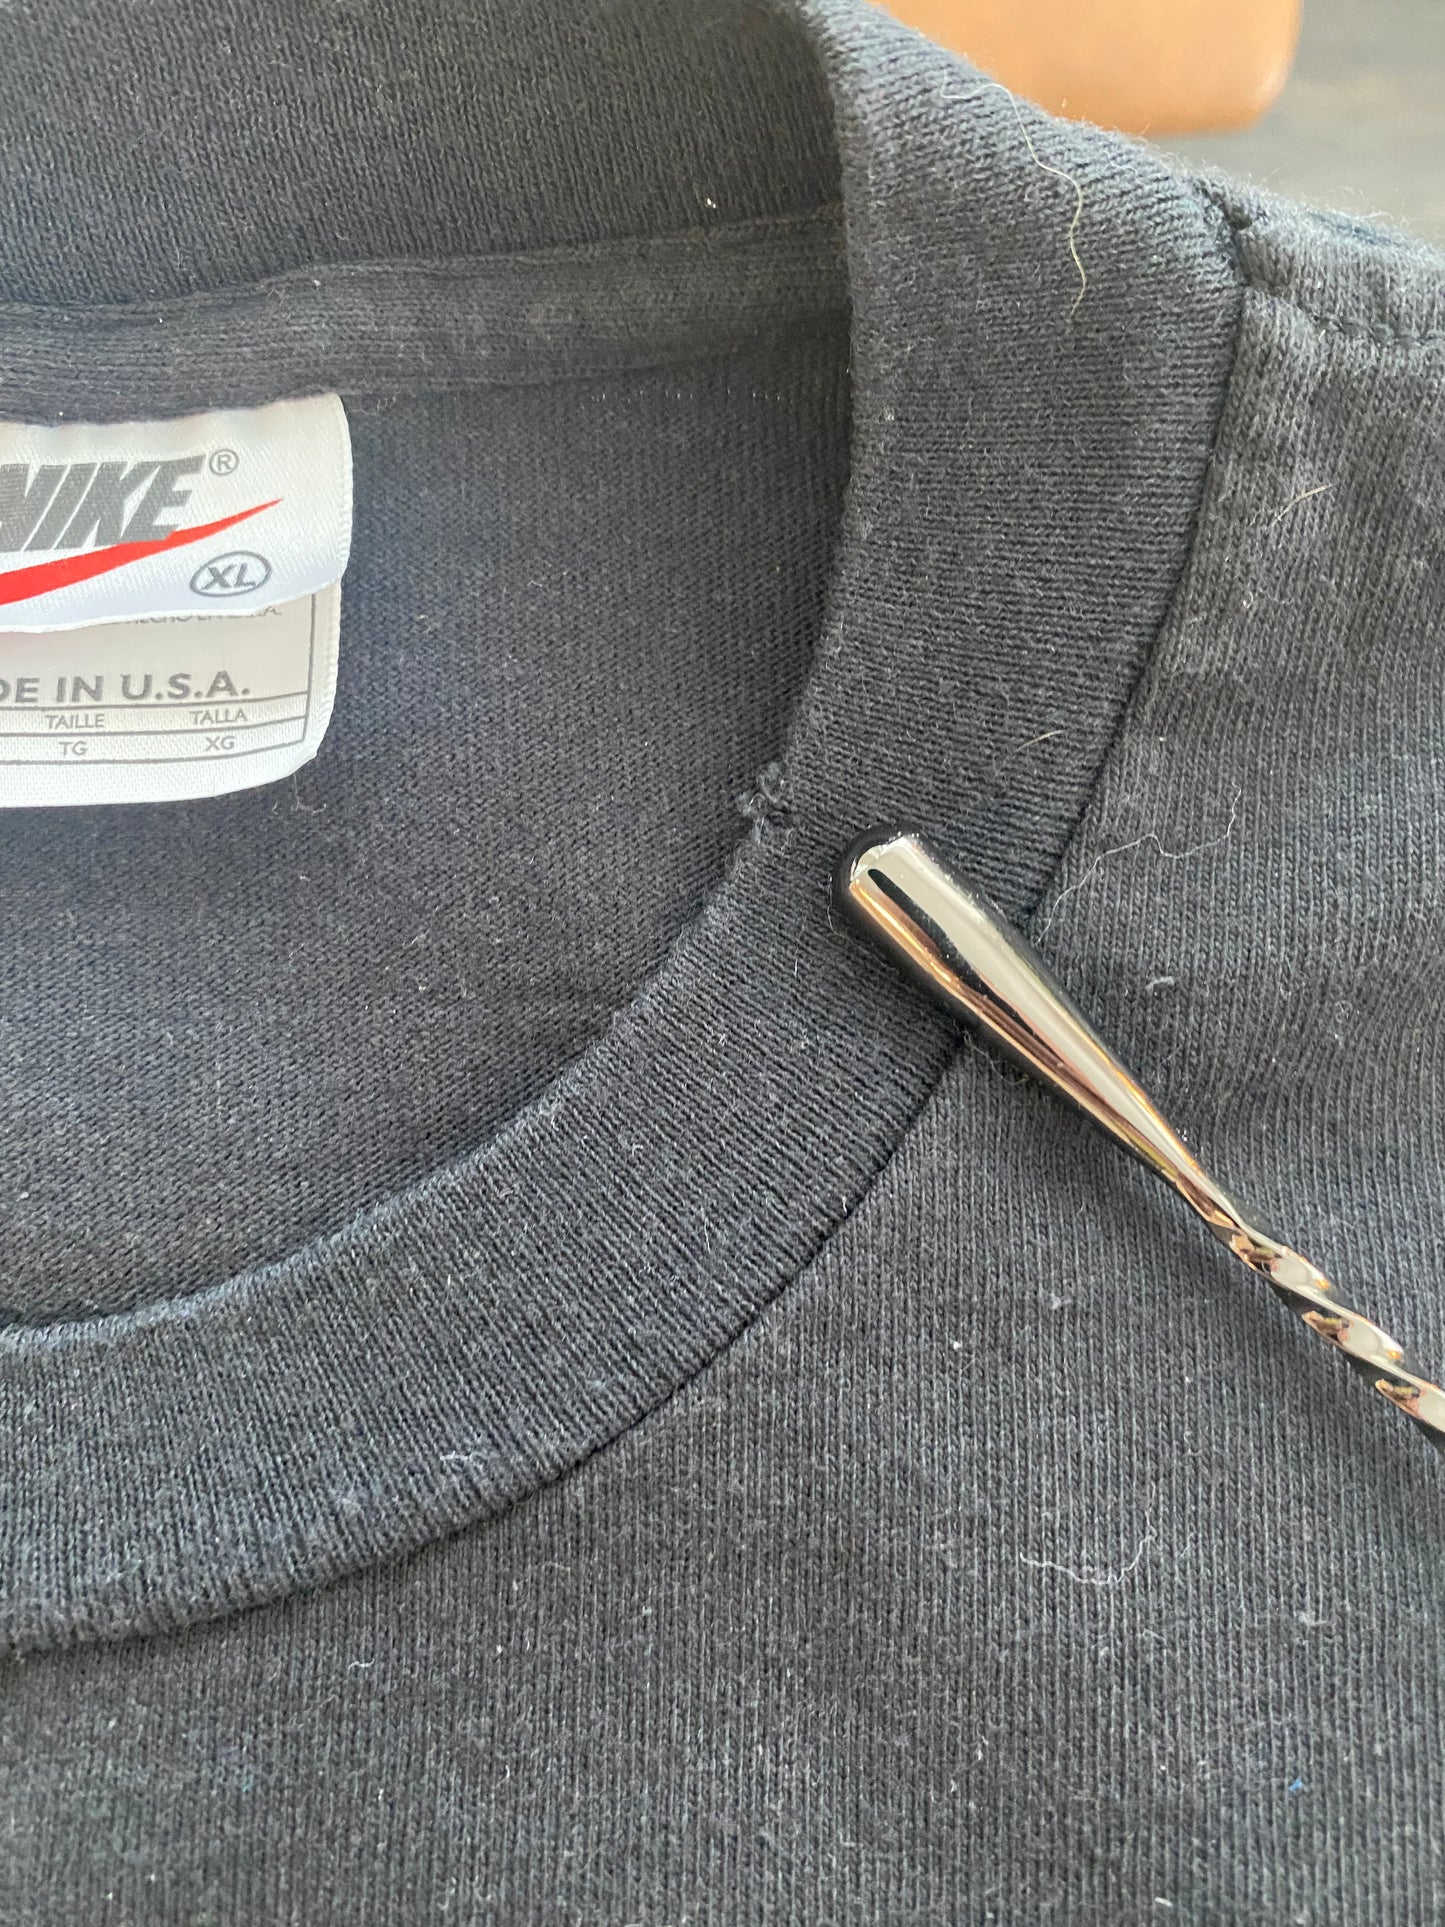 Vintage Nike Golf Embroidered. XL